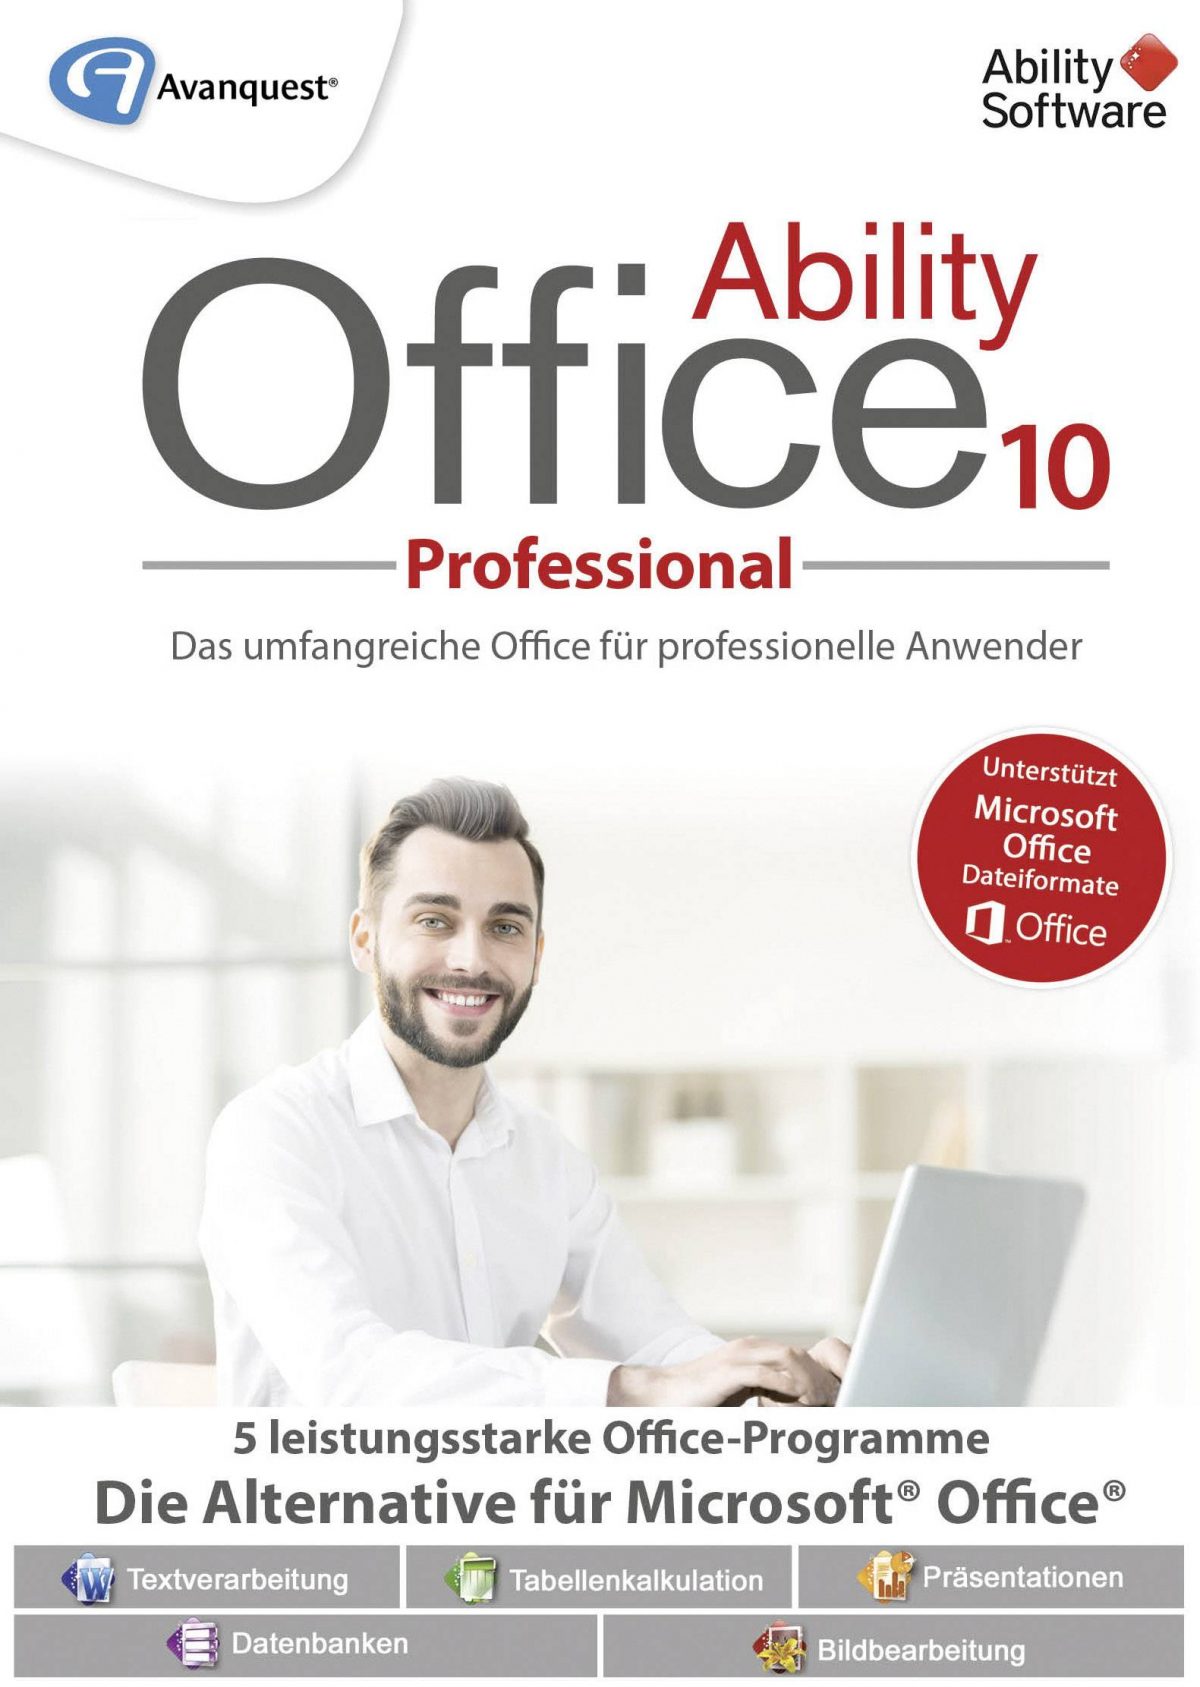 Ability Office Professional 10.0.3 Crack Full Pre-Patched Download